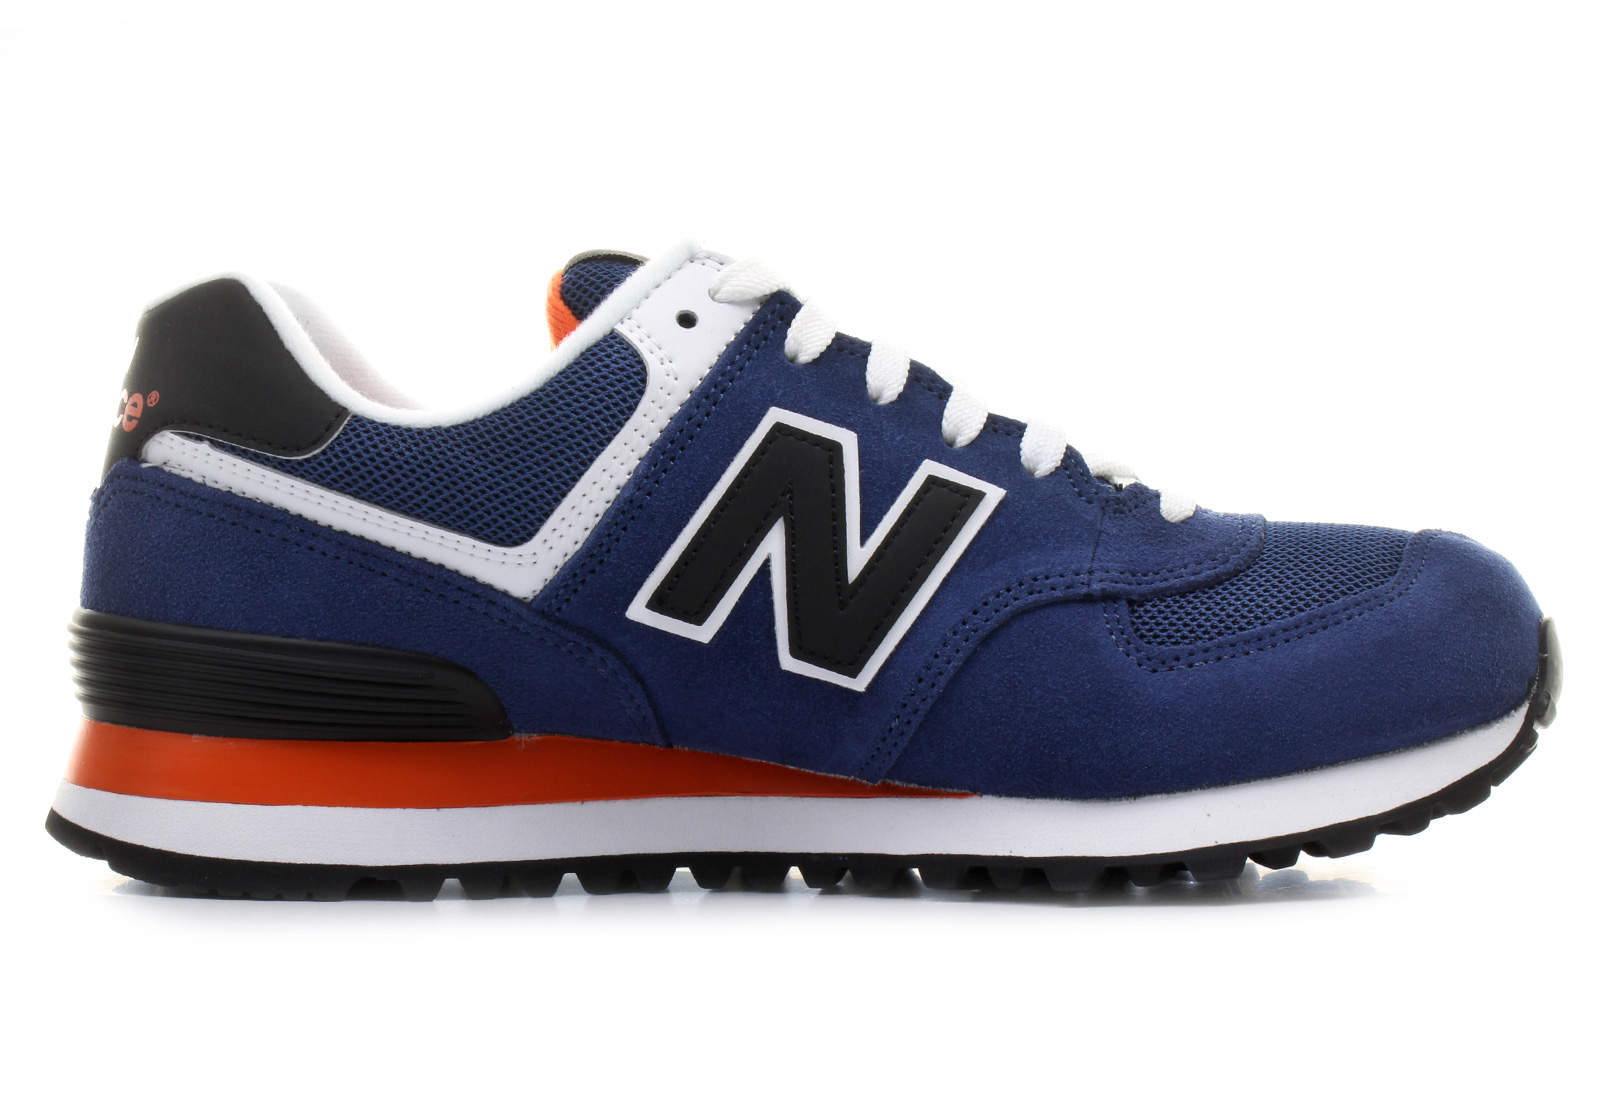 New Balance Shoes - Ml574 - ML574MOY - Online shop for sneakers, shoes ...